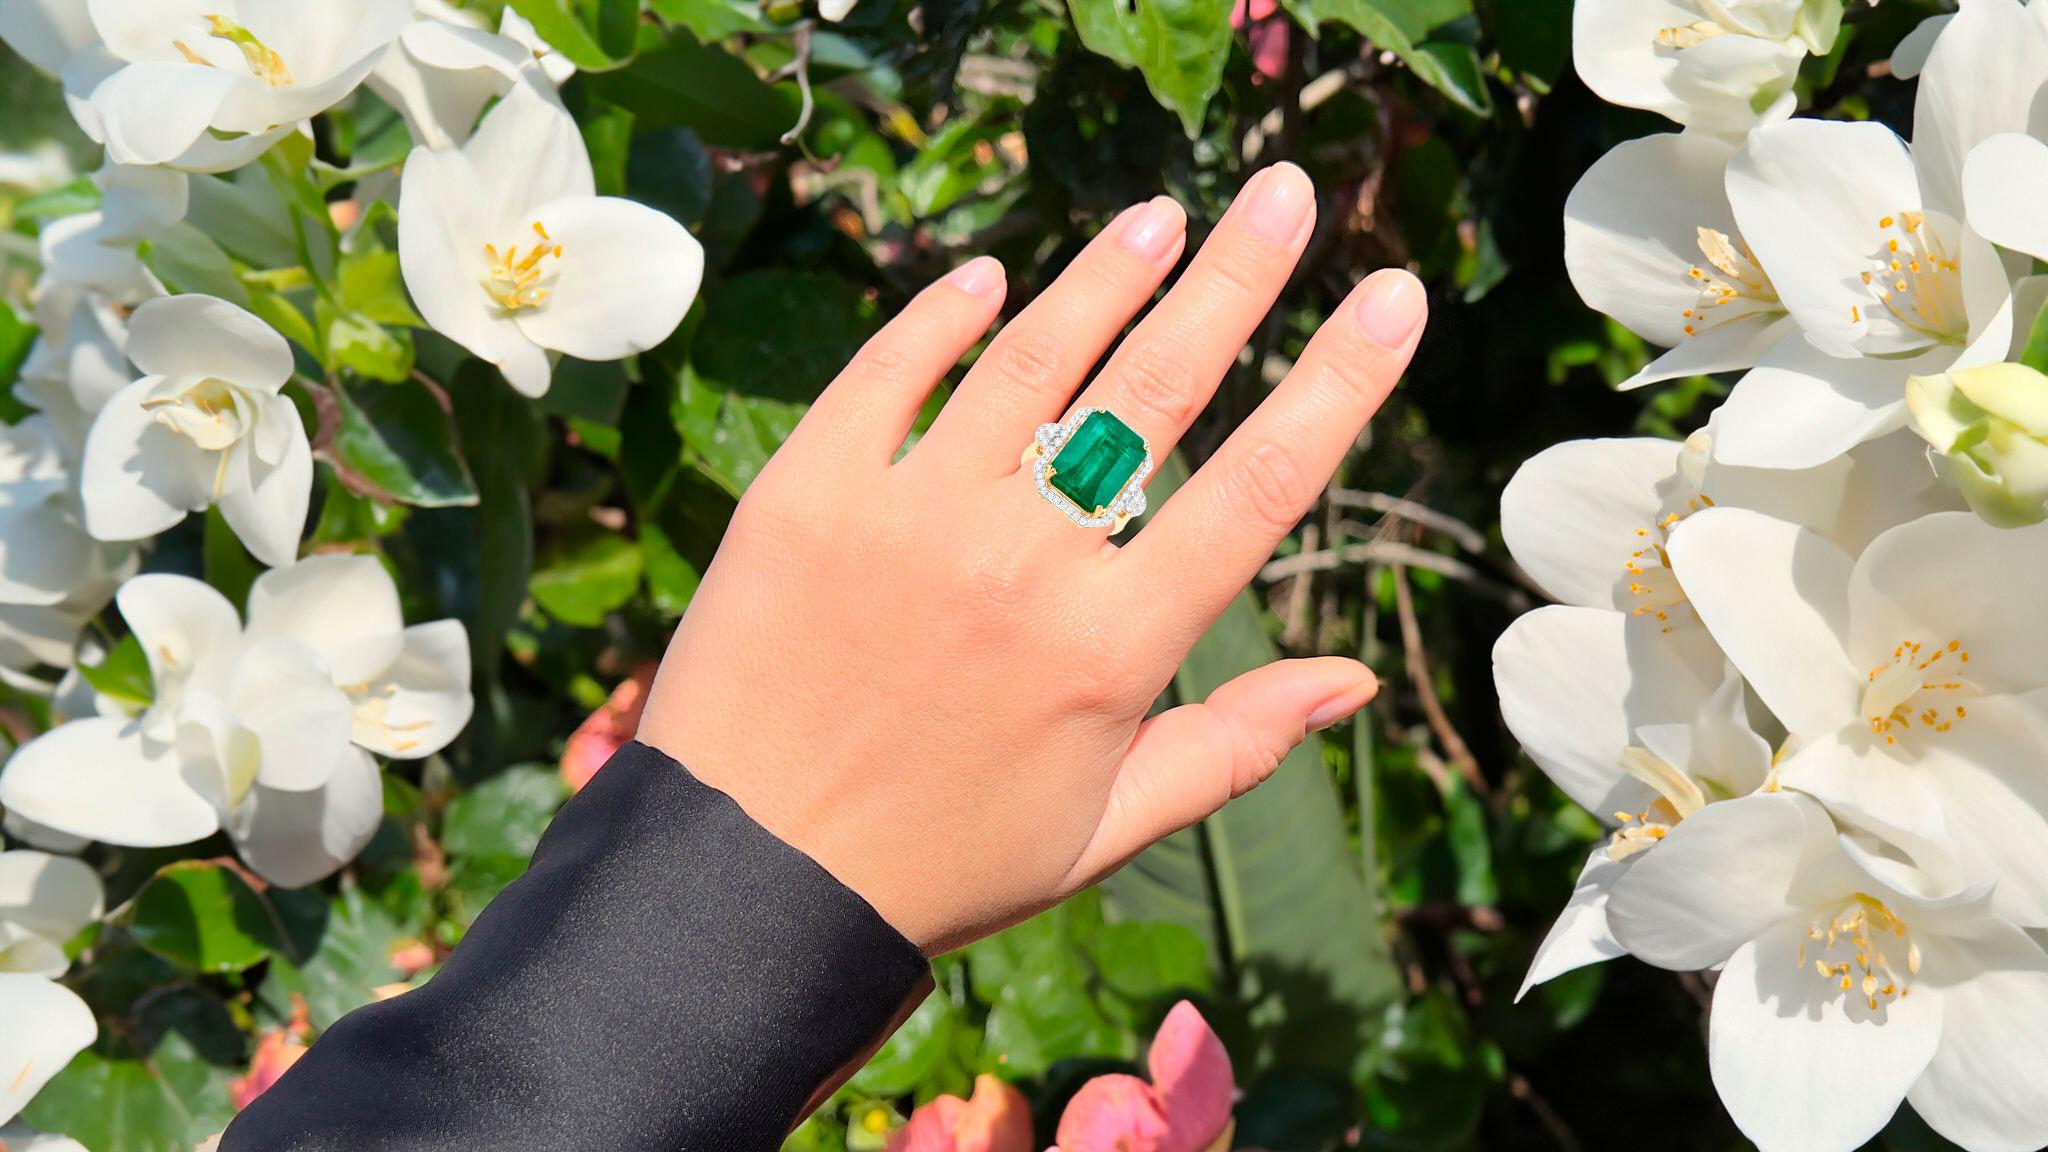 It comes with the original IGI Certificate
All Gemstones are Natural
Emerald = 11.52 Carats
54 Diamonds = 0.50 Carats
Metal: 14K Yellow Gold
Ring Size: 7* US
*It can be resized complimentary